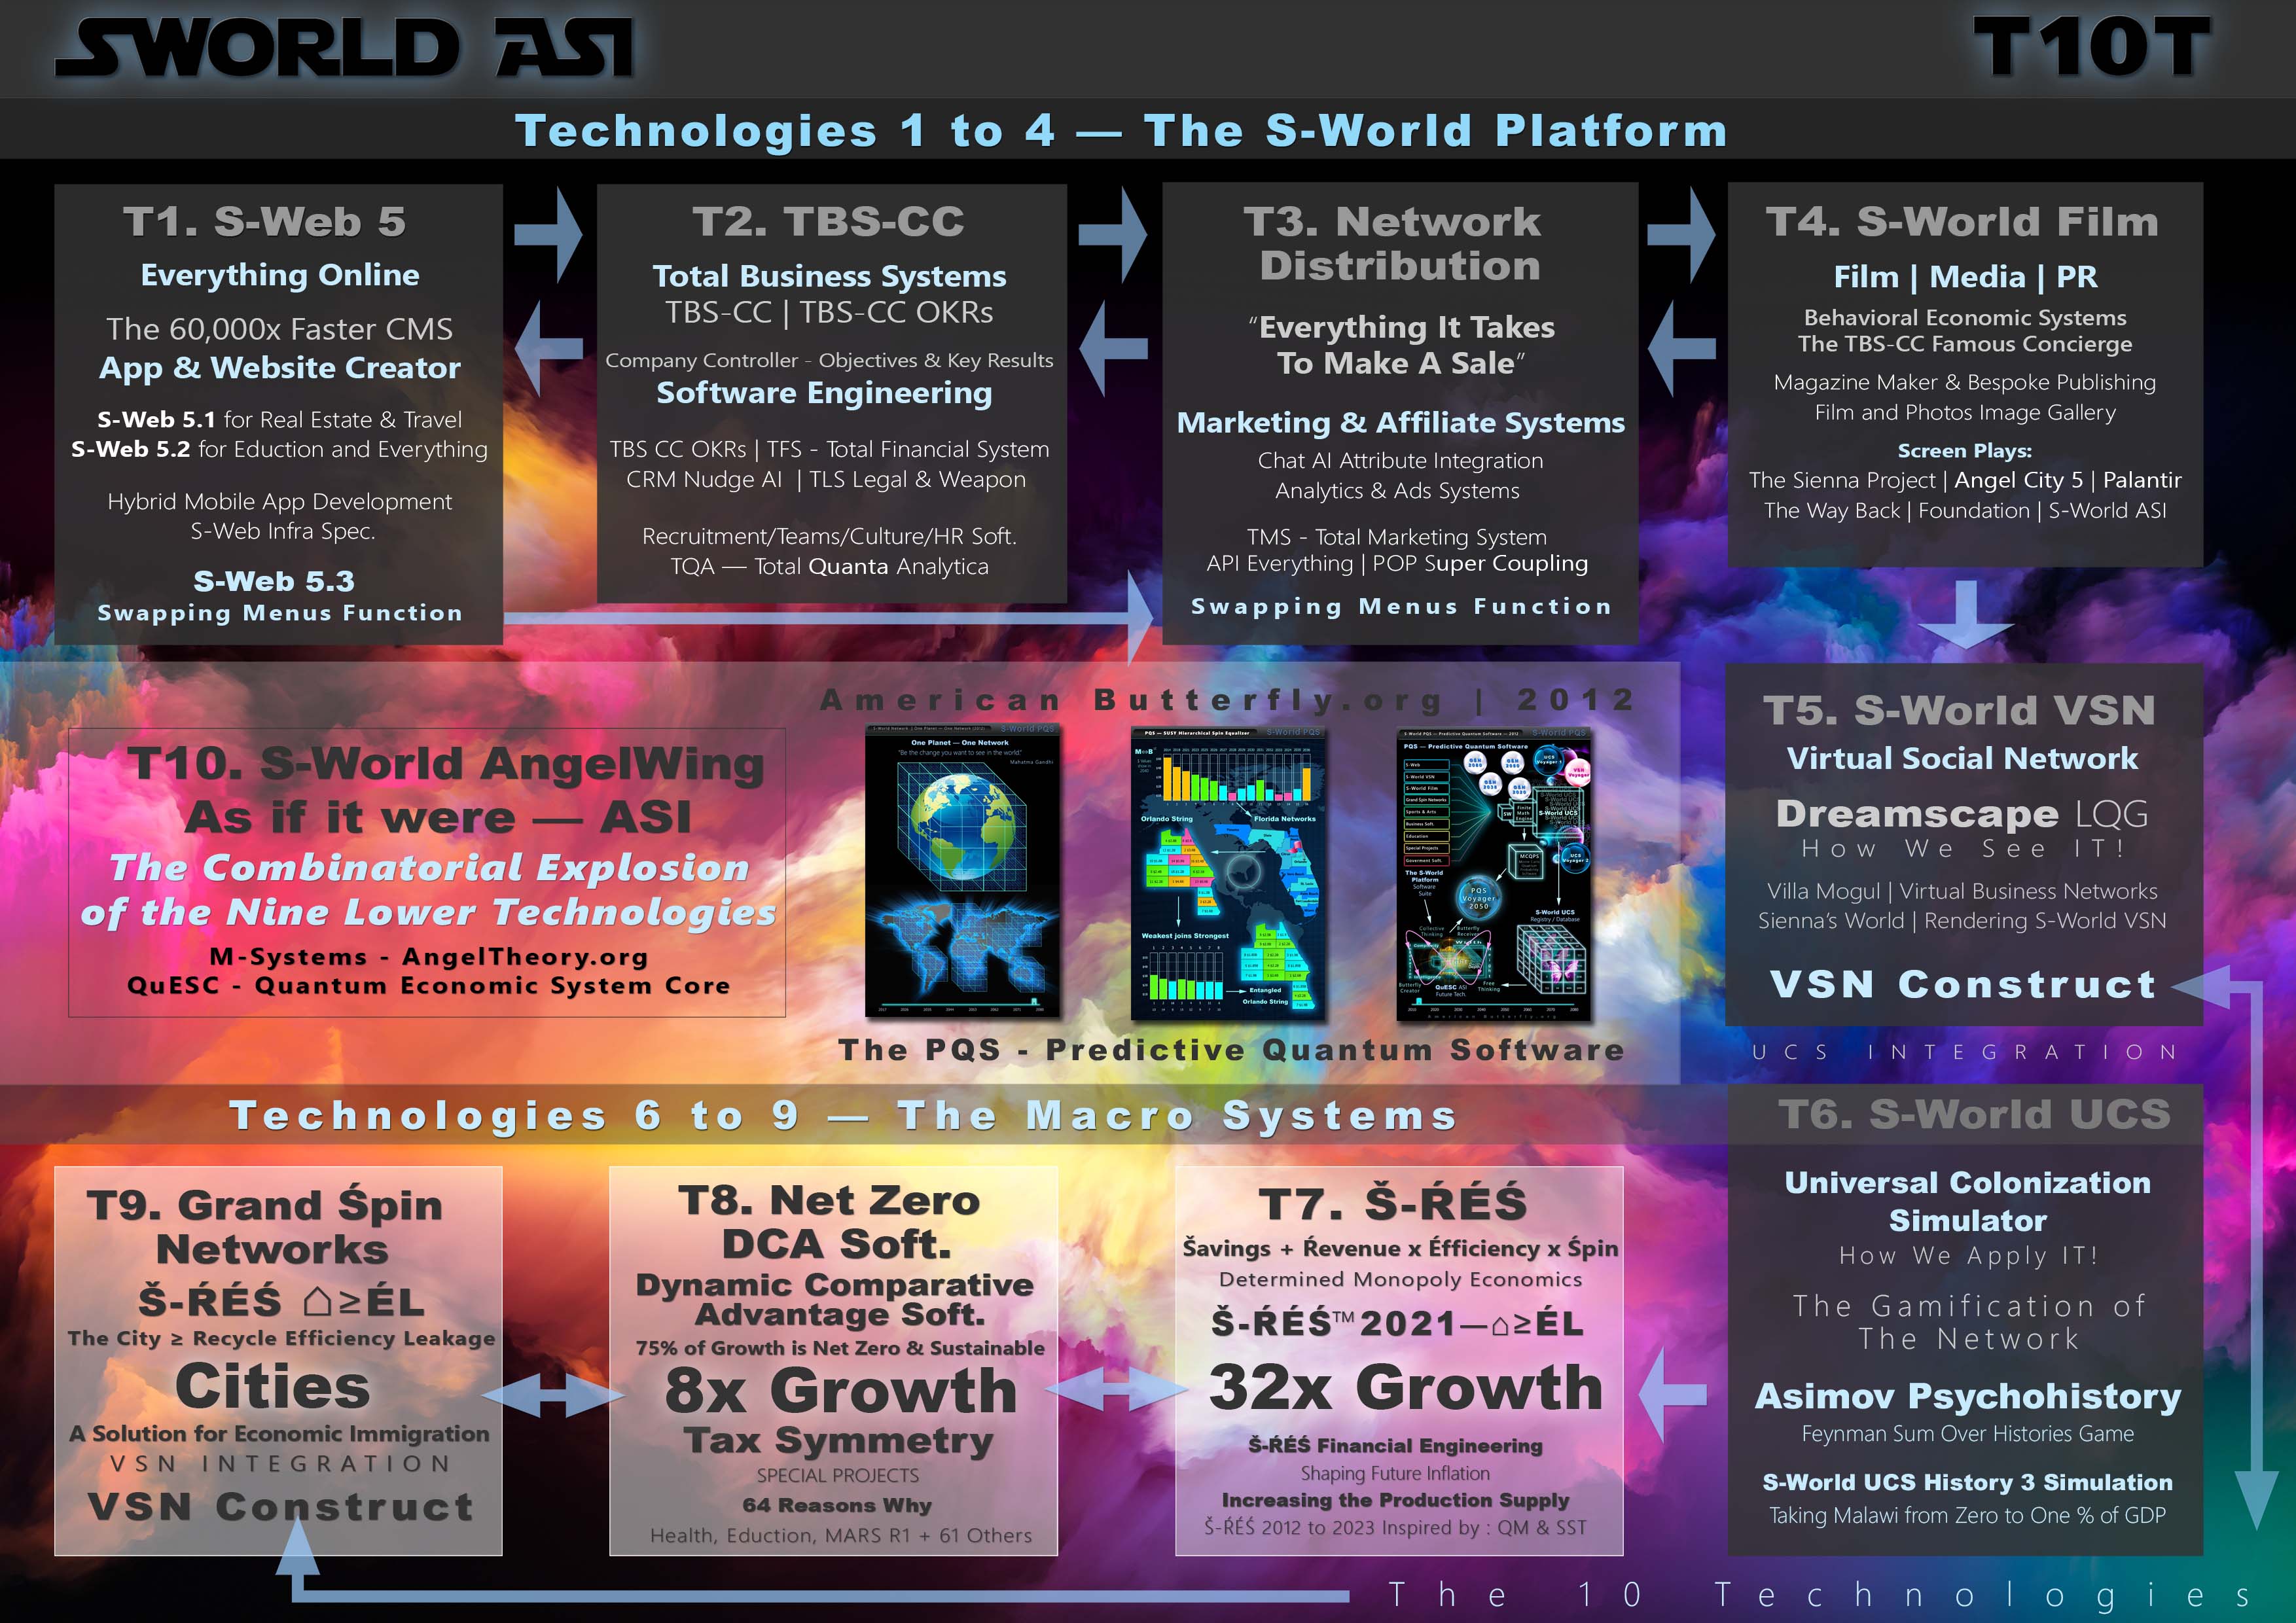 S-World ASI - The 10 Technologies - v1.10c - Many Colours Background - Jedi Font Blue Outline (Sienna's Angel Birthday)